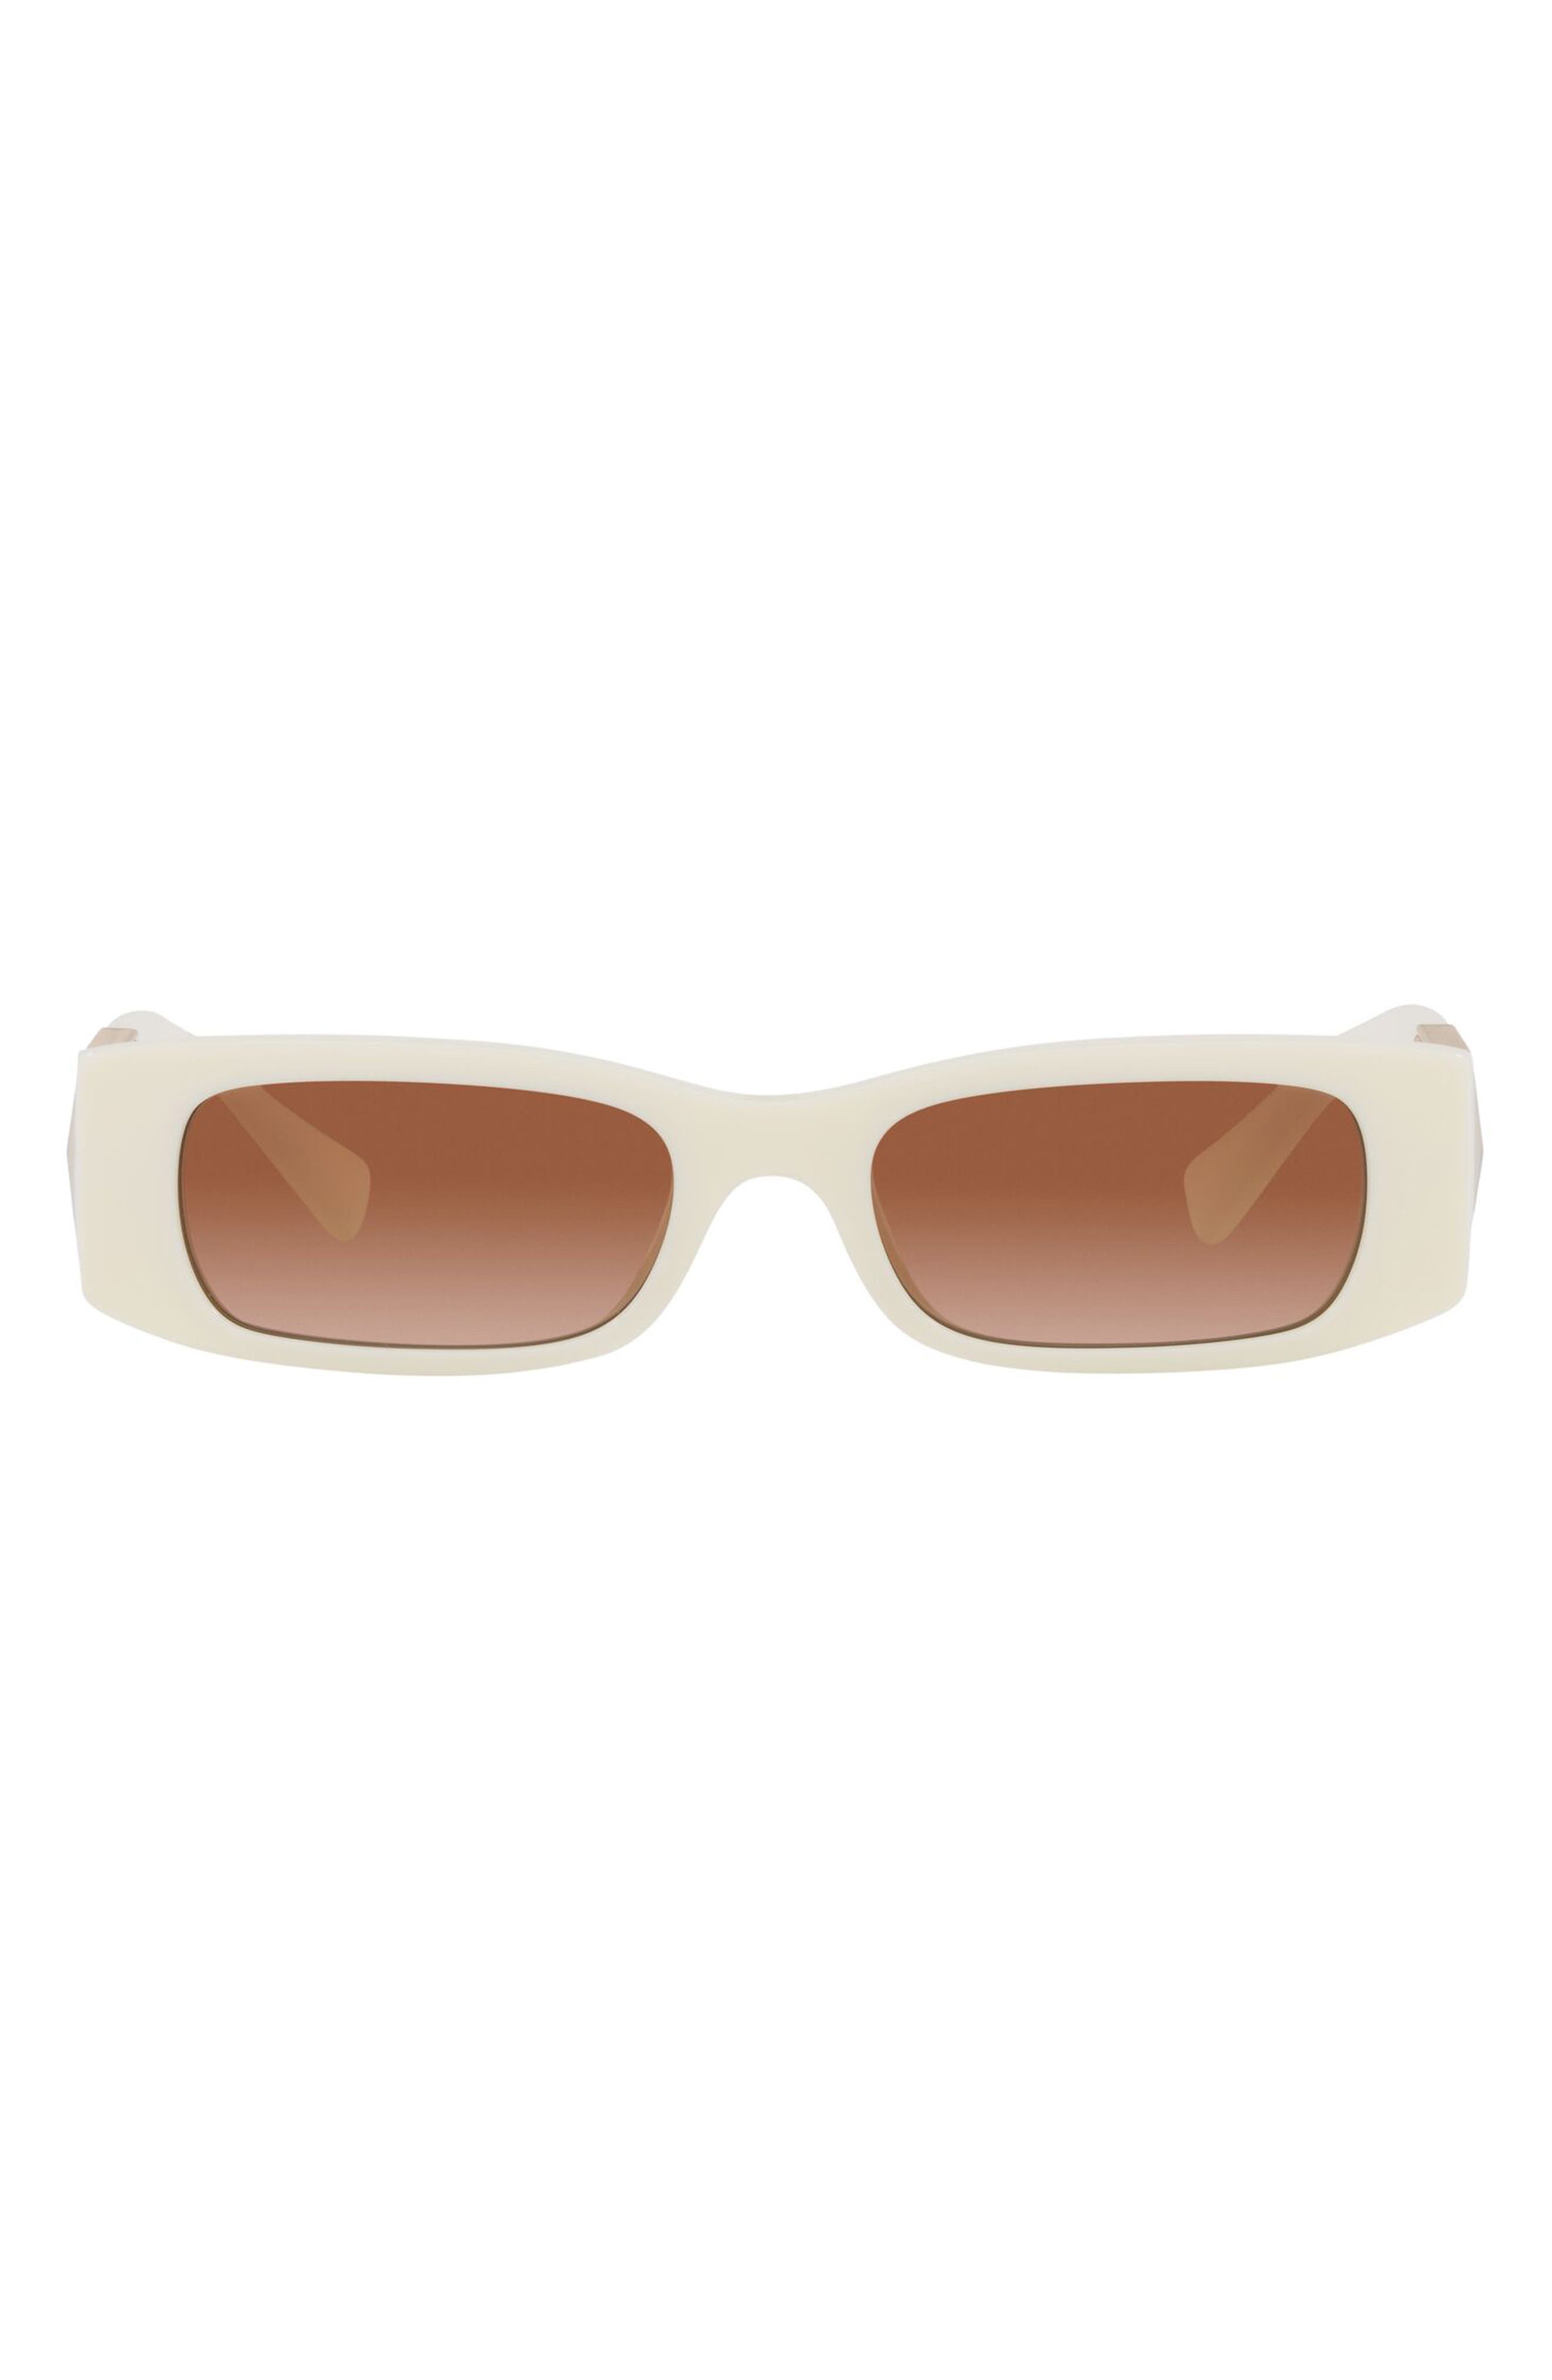 Valentino 51mm Rectangle Sunglasses in Ivory/Gradient Brown at Nordstrom